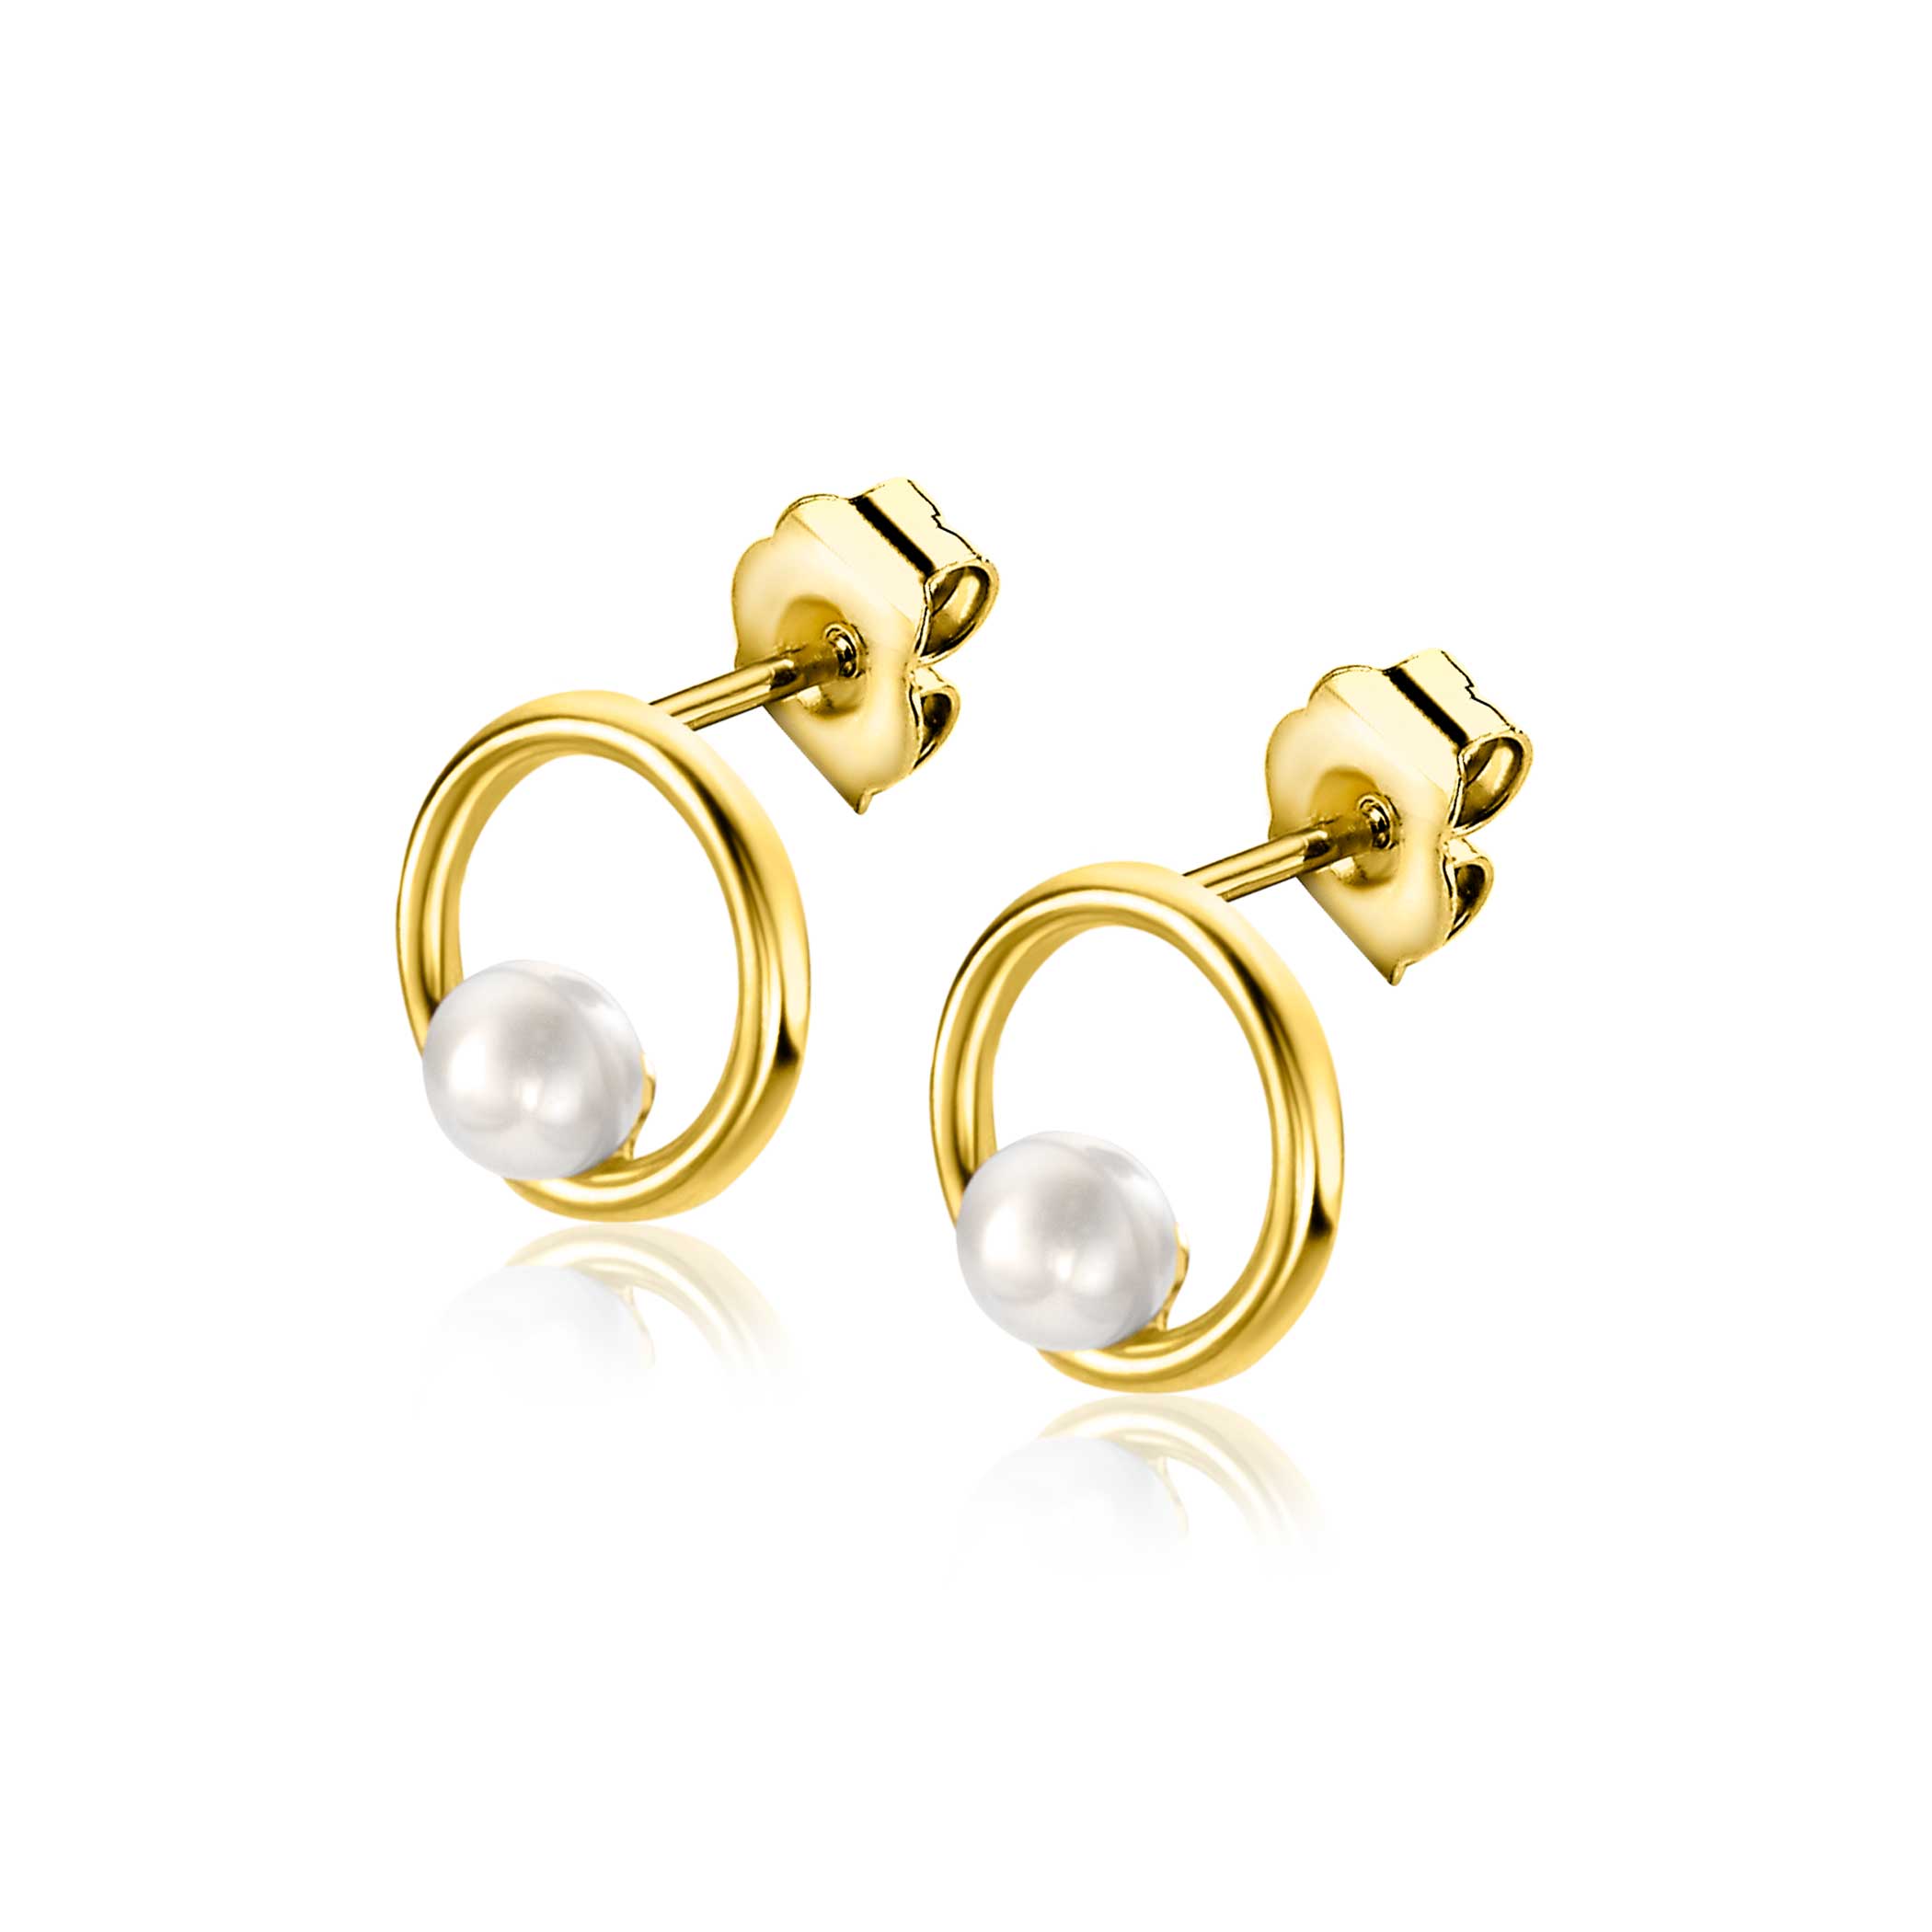 8mm ZINZI 14K Gold Stud Earrings Open Round and White Pearl ZGO418